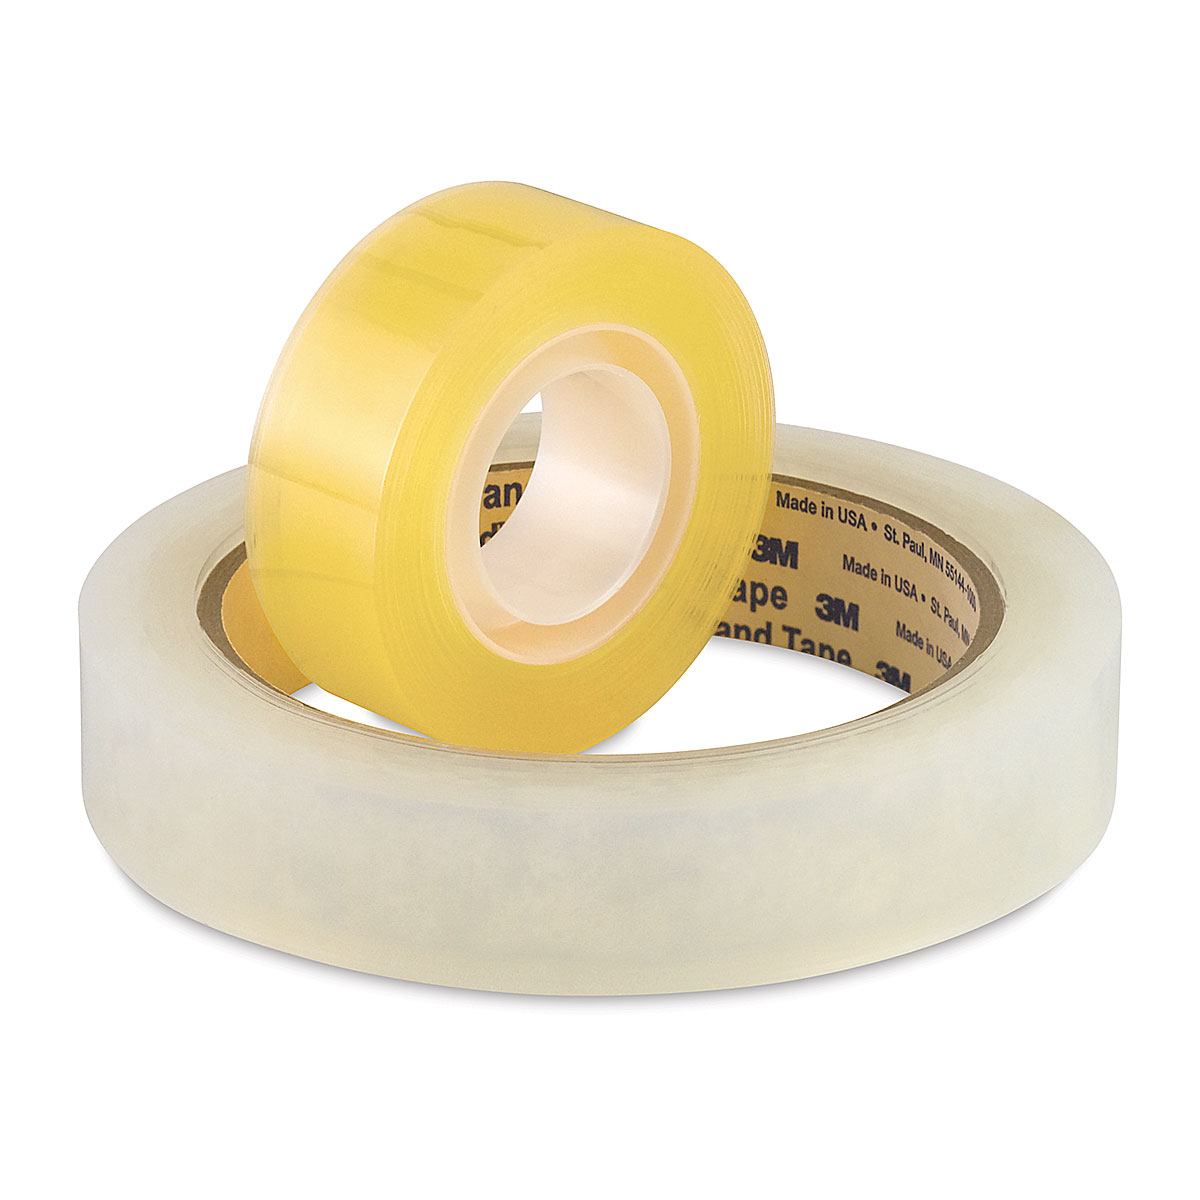 Watercolor Washout Tape, Clear - 2 x 36 Yards, BLICK Art Materials